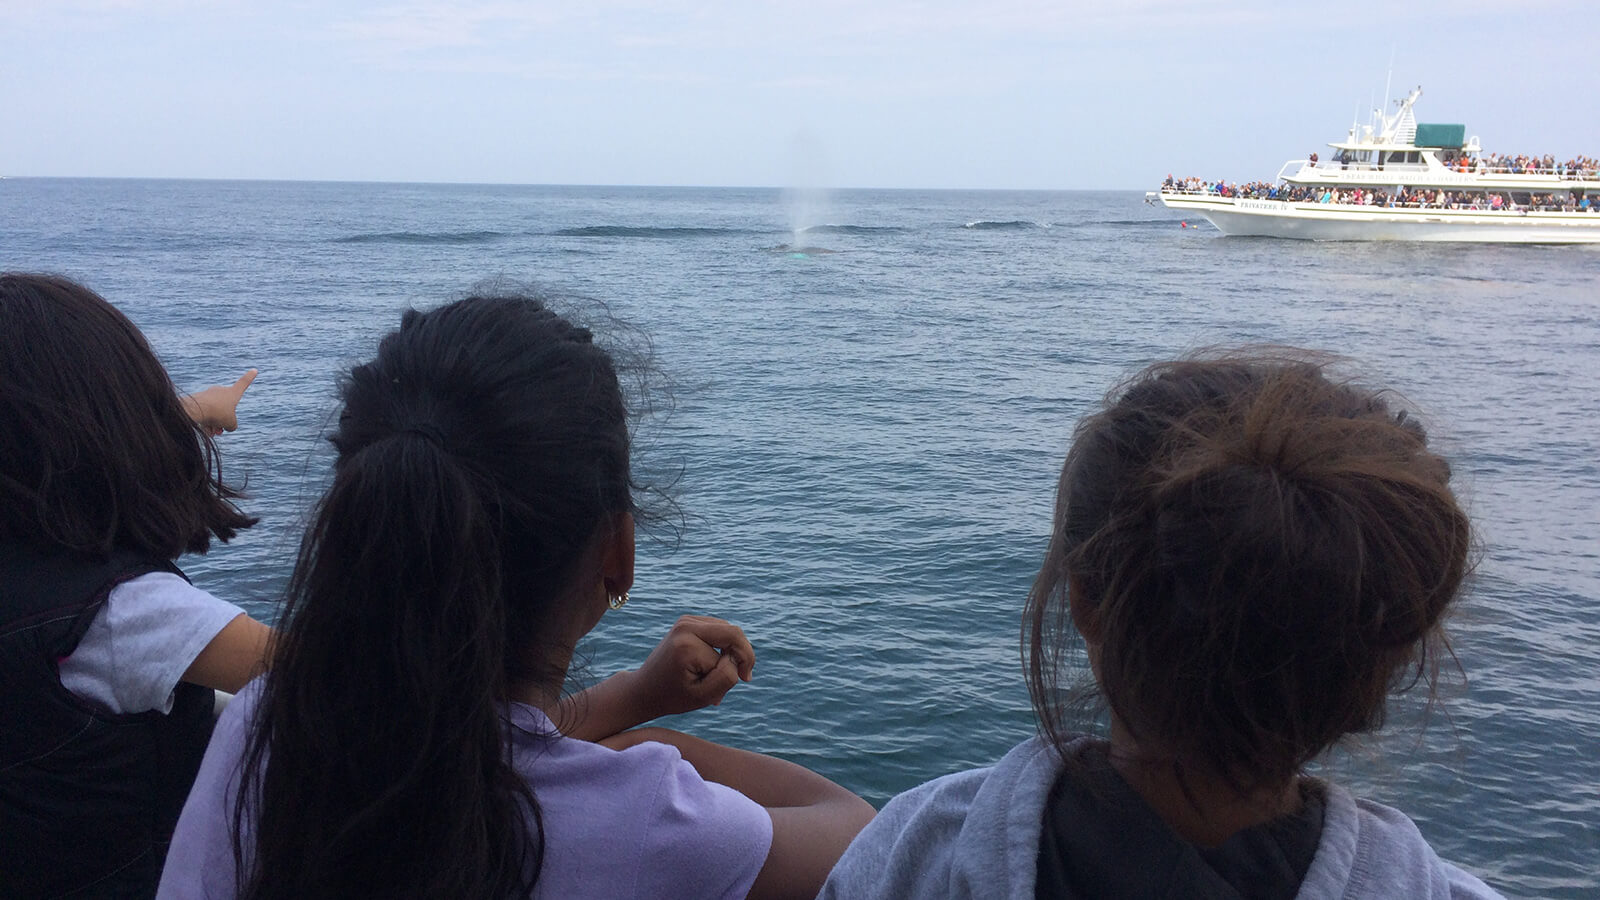 kids looking out over the water at a whale on a whale watching boat